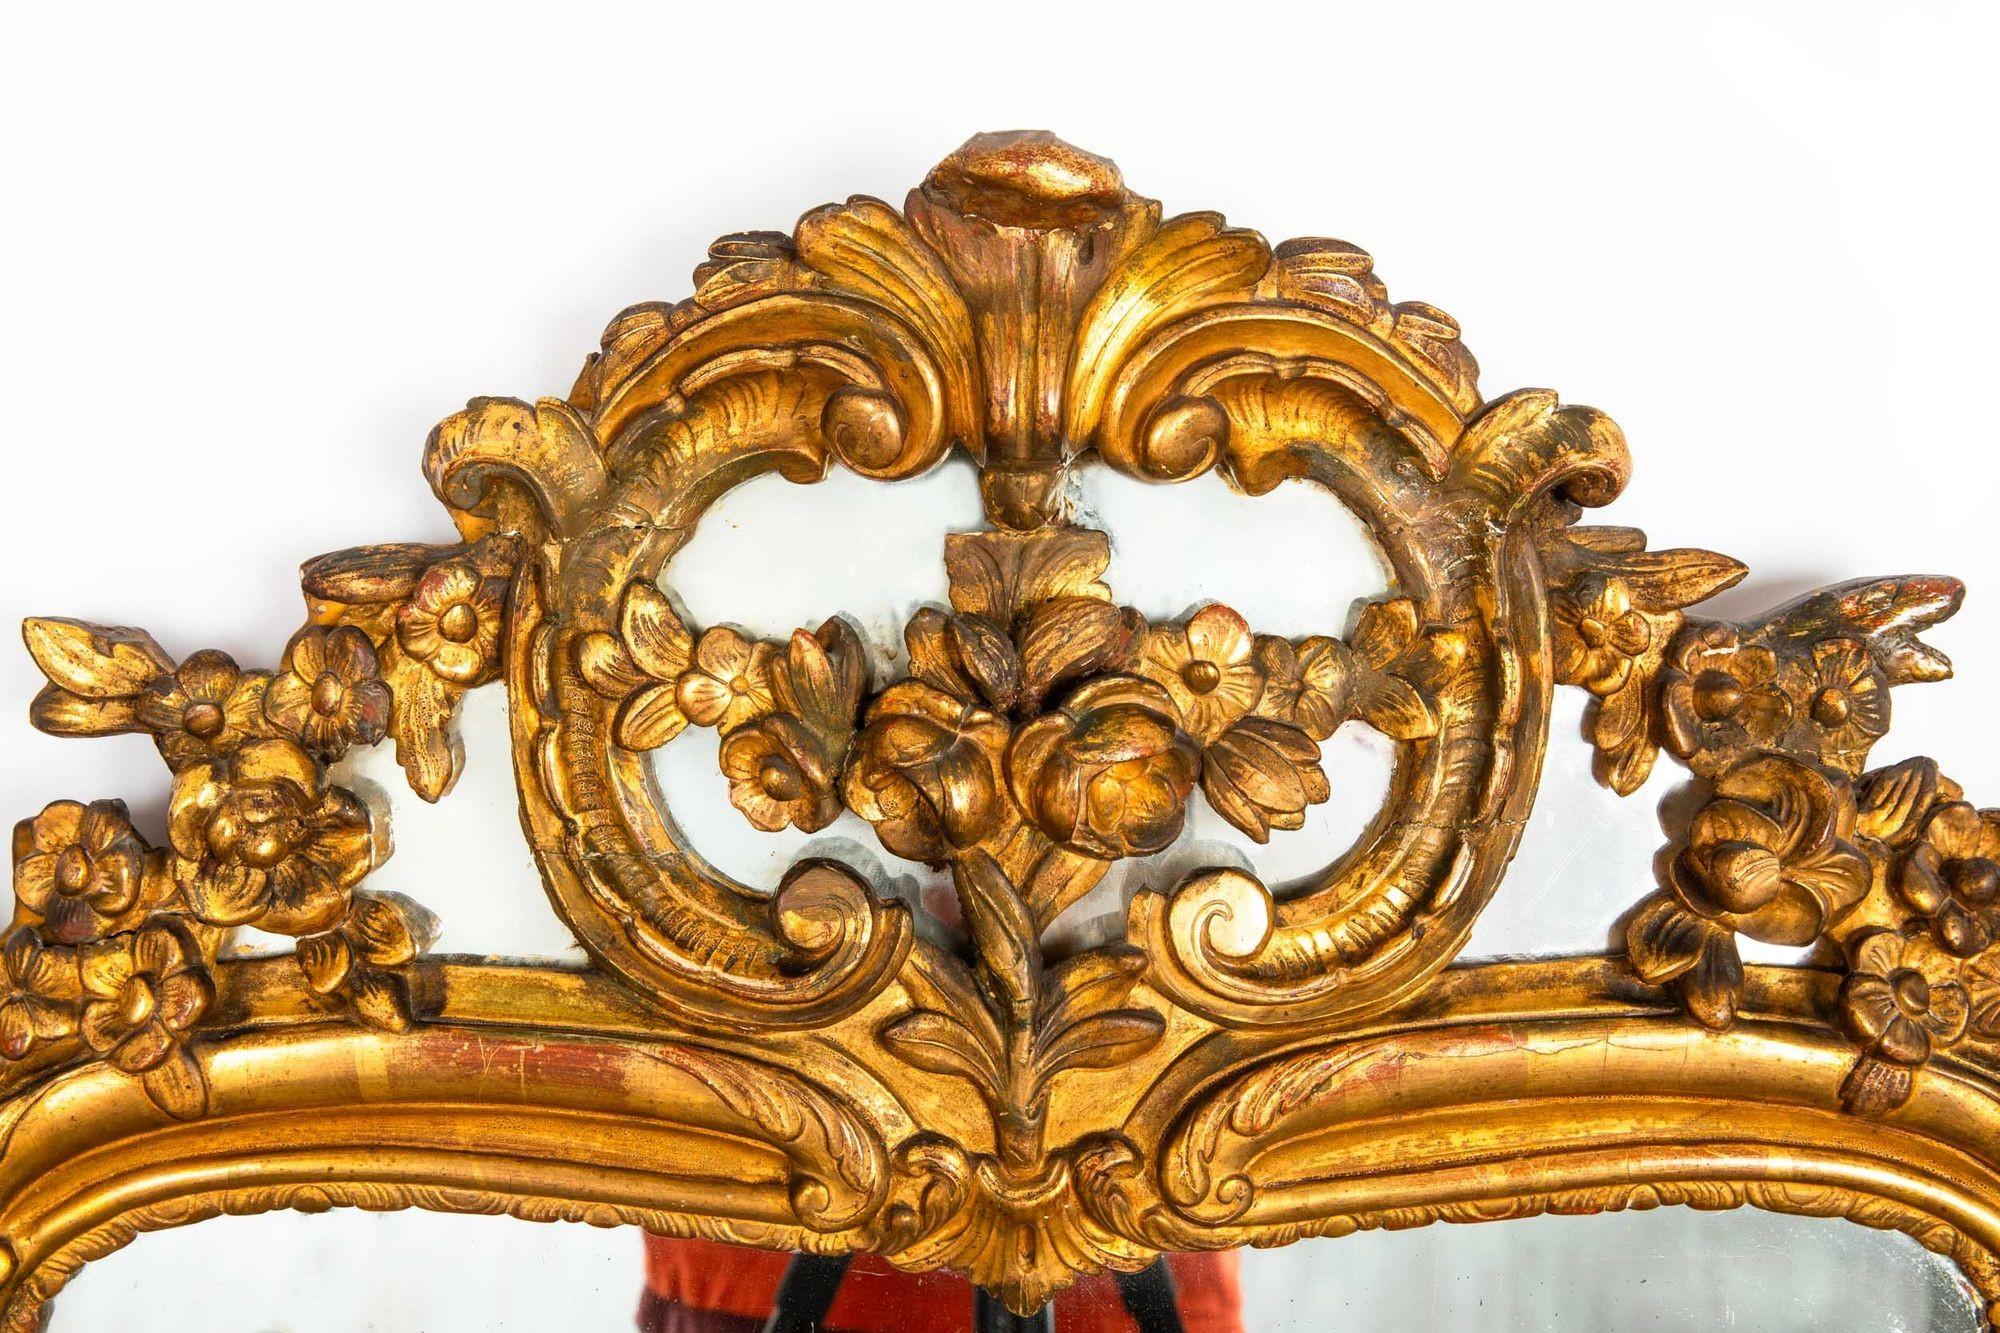 LOUIS XV PERIOD CARVED GILTWOOD WALL MIRROR
France, circa 1750  with much of the original gilding intact
Item # 307QOU13Z 

A wonderful 18th century carved giltwood mirror, the surface is positively gorgeous with oxidization and discoloration from